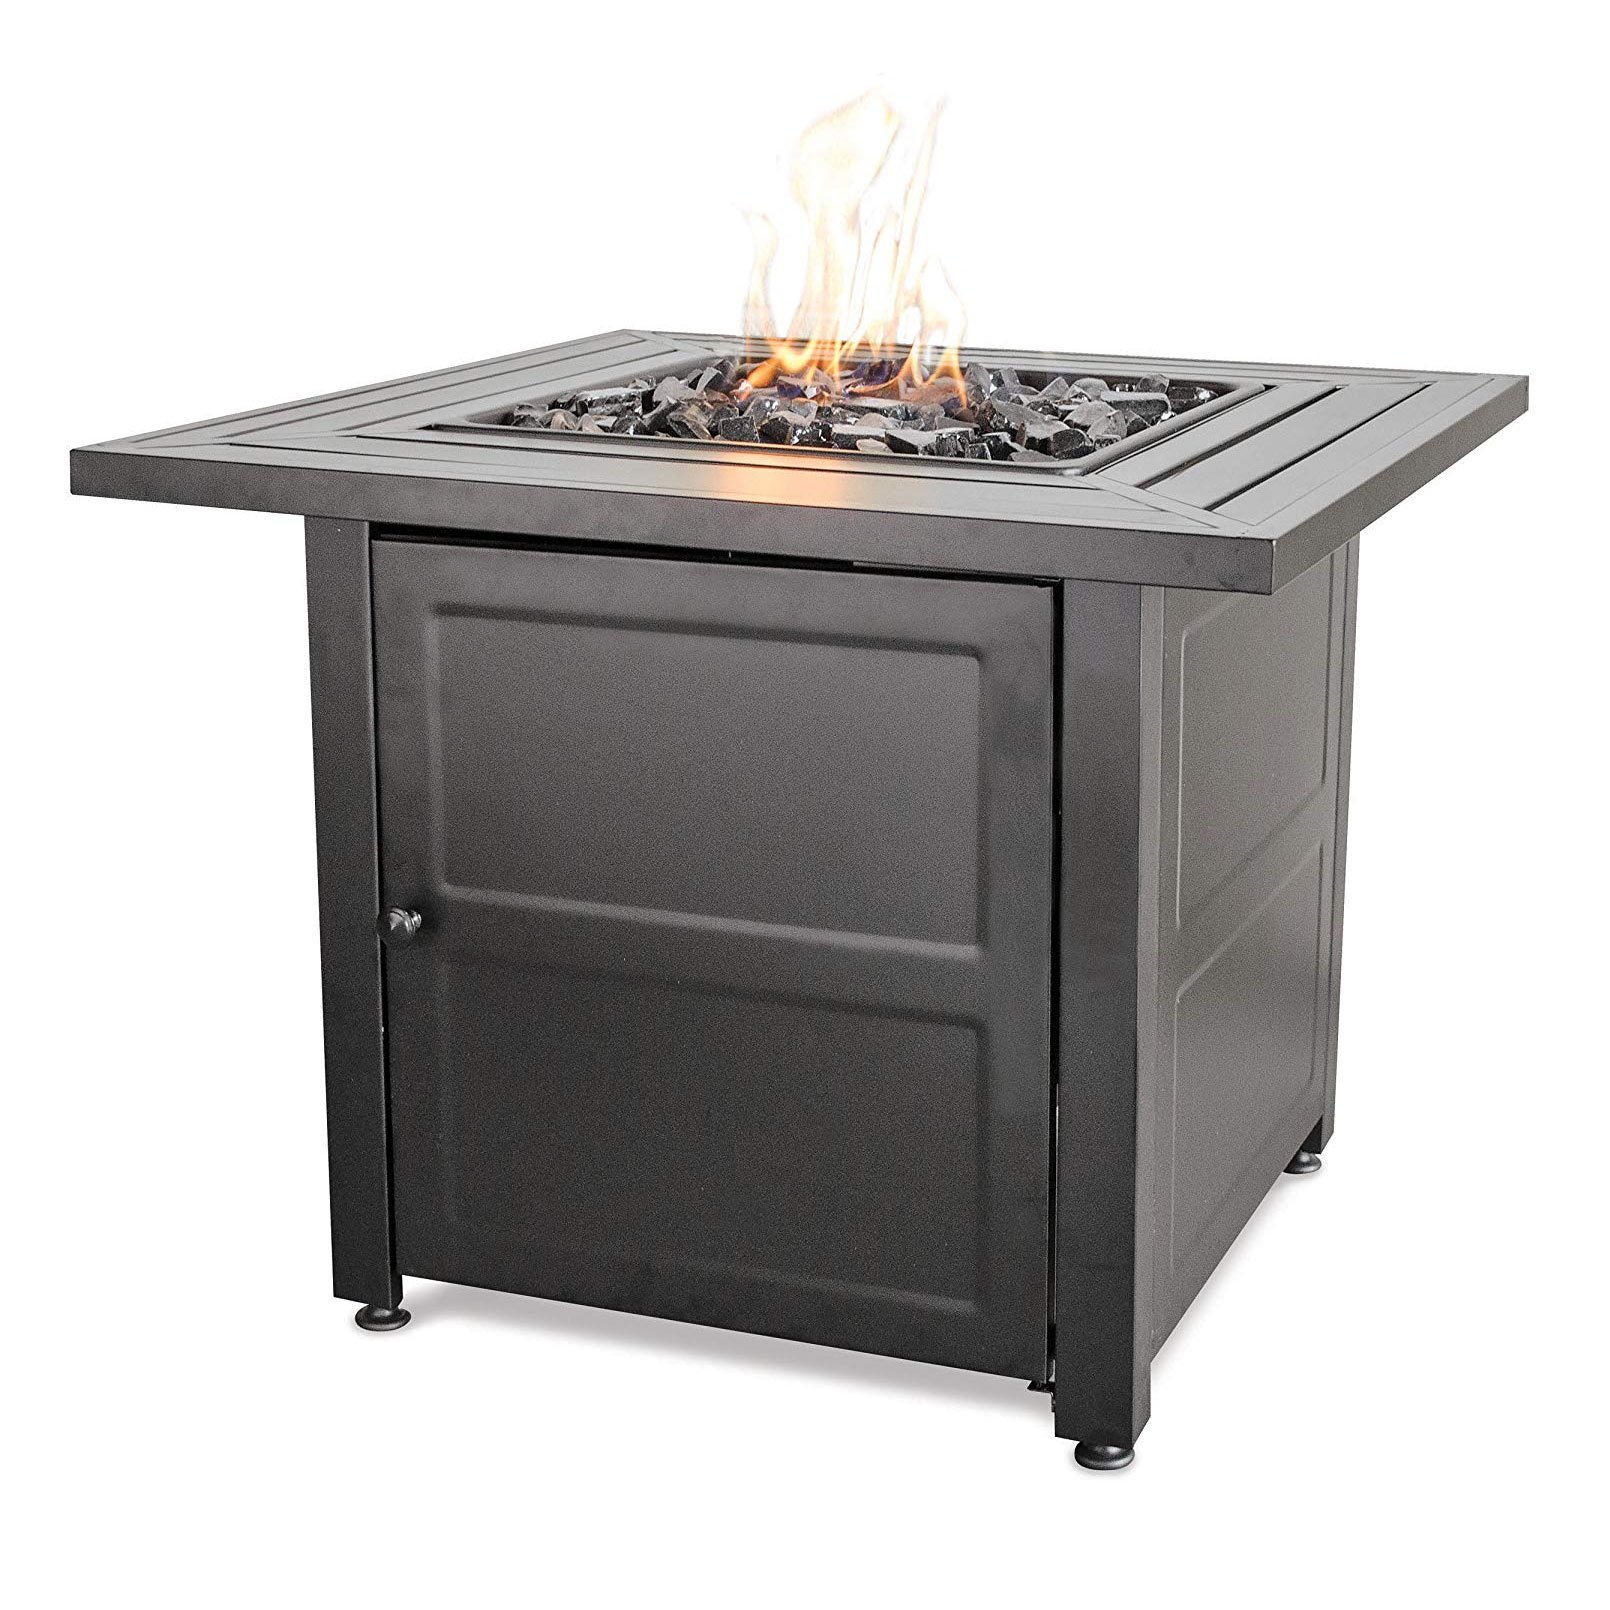 Gas Fire Pits, What To Look For In A Fire Pit Table